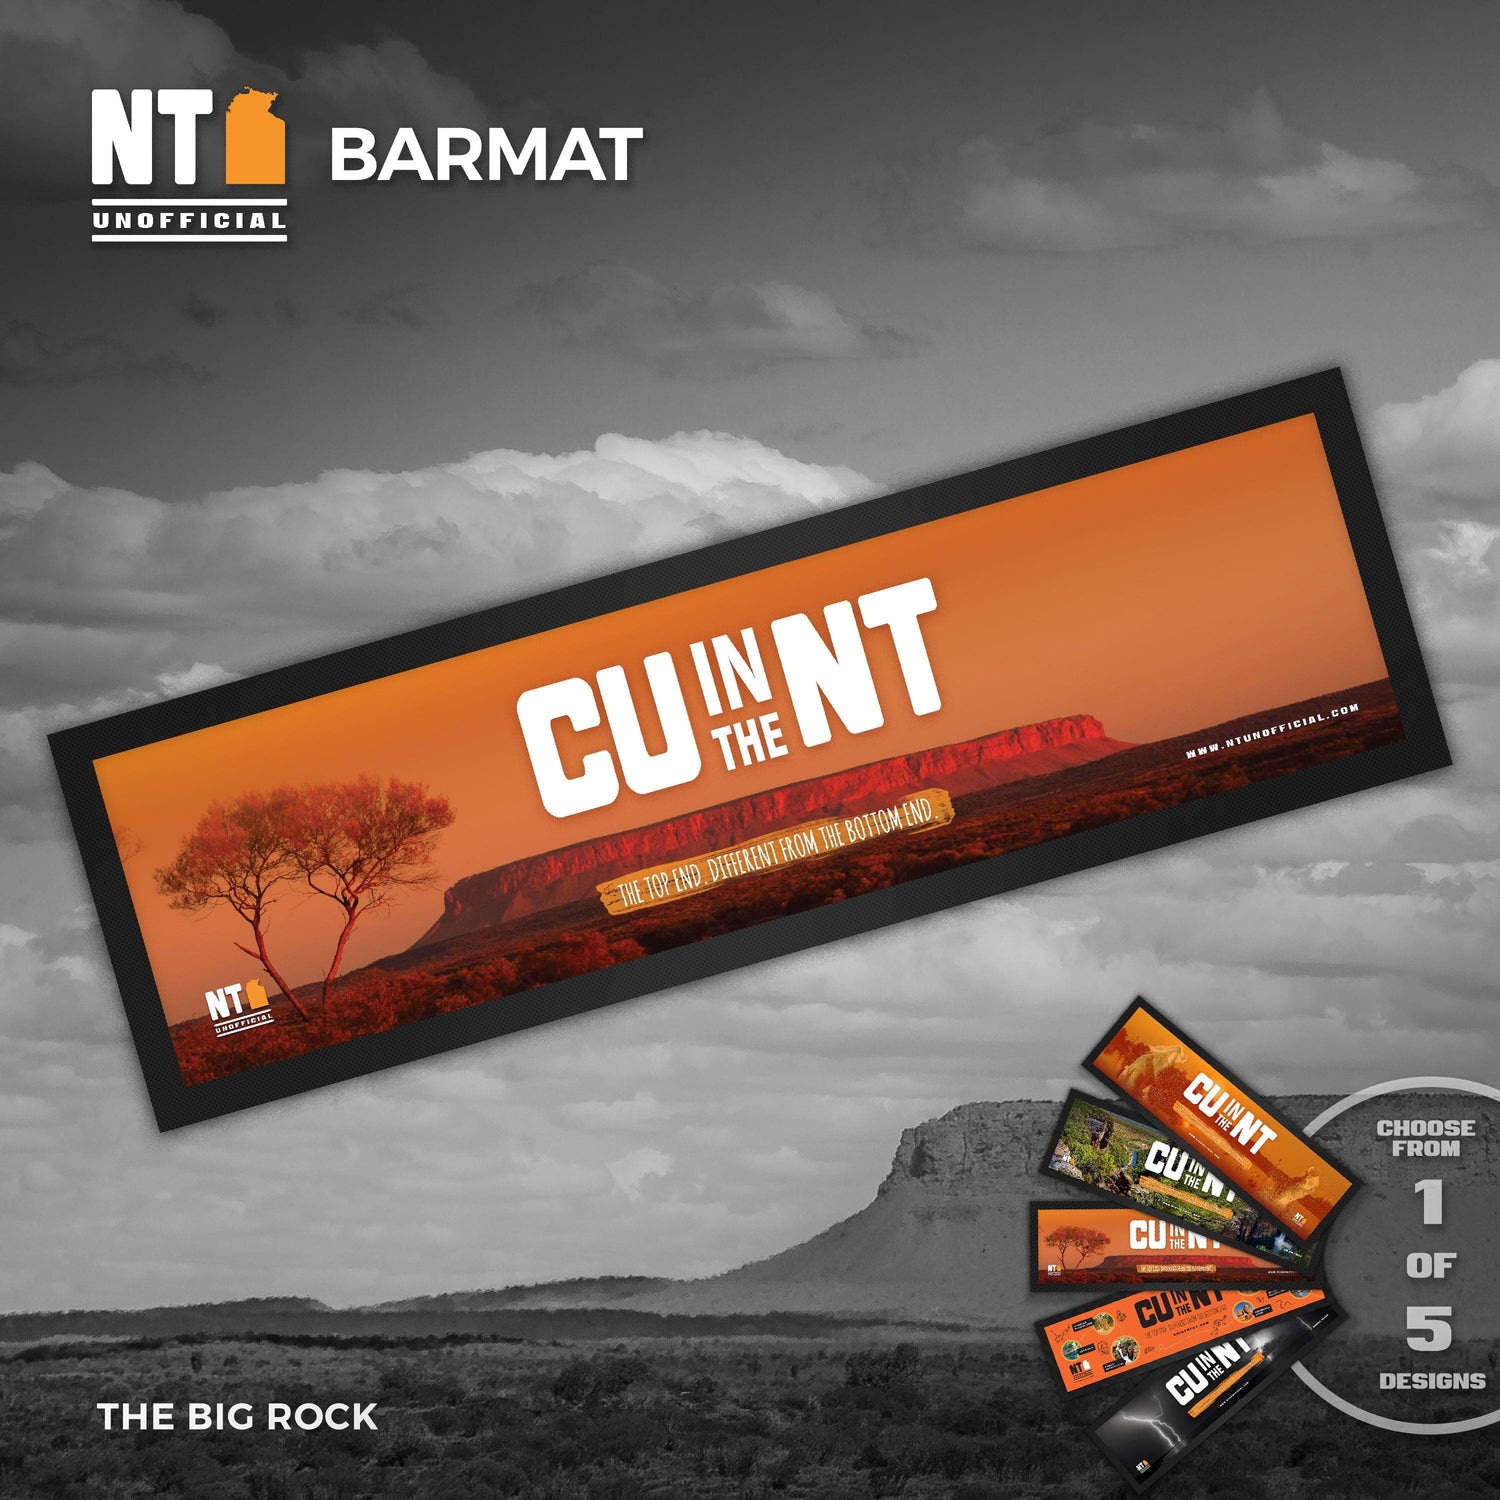 CU in the NT Barmat - Big Rock NT Unofficial